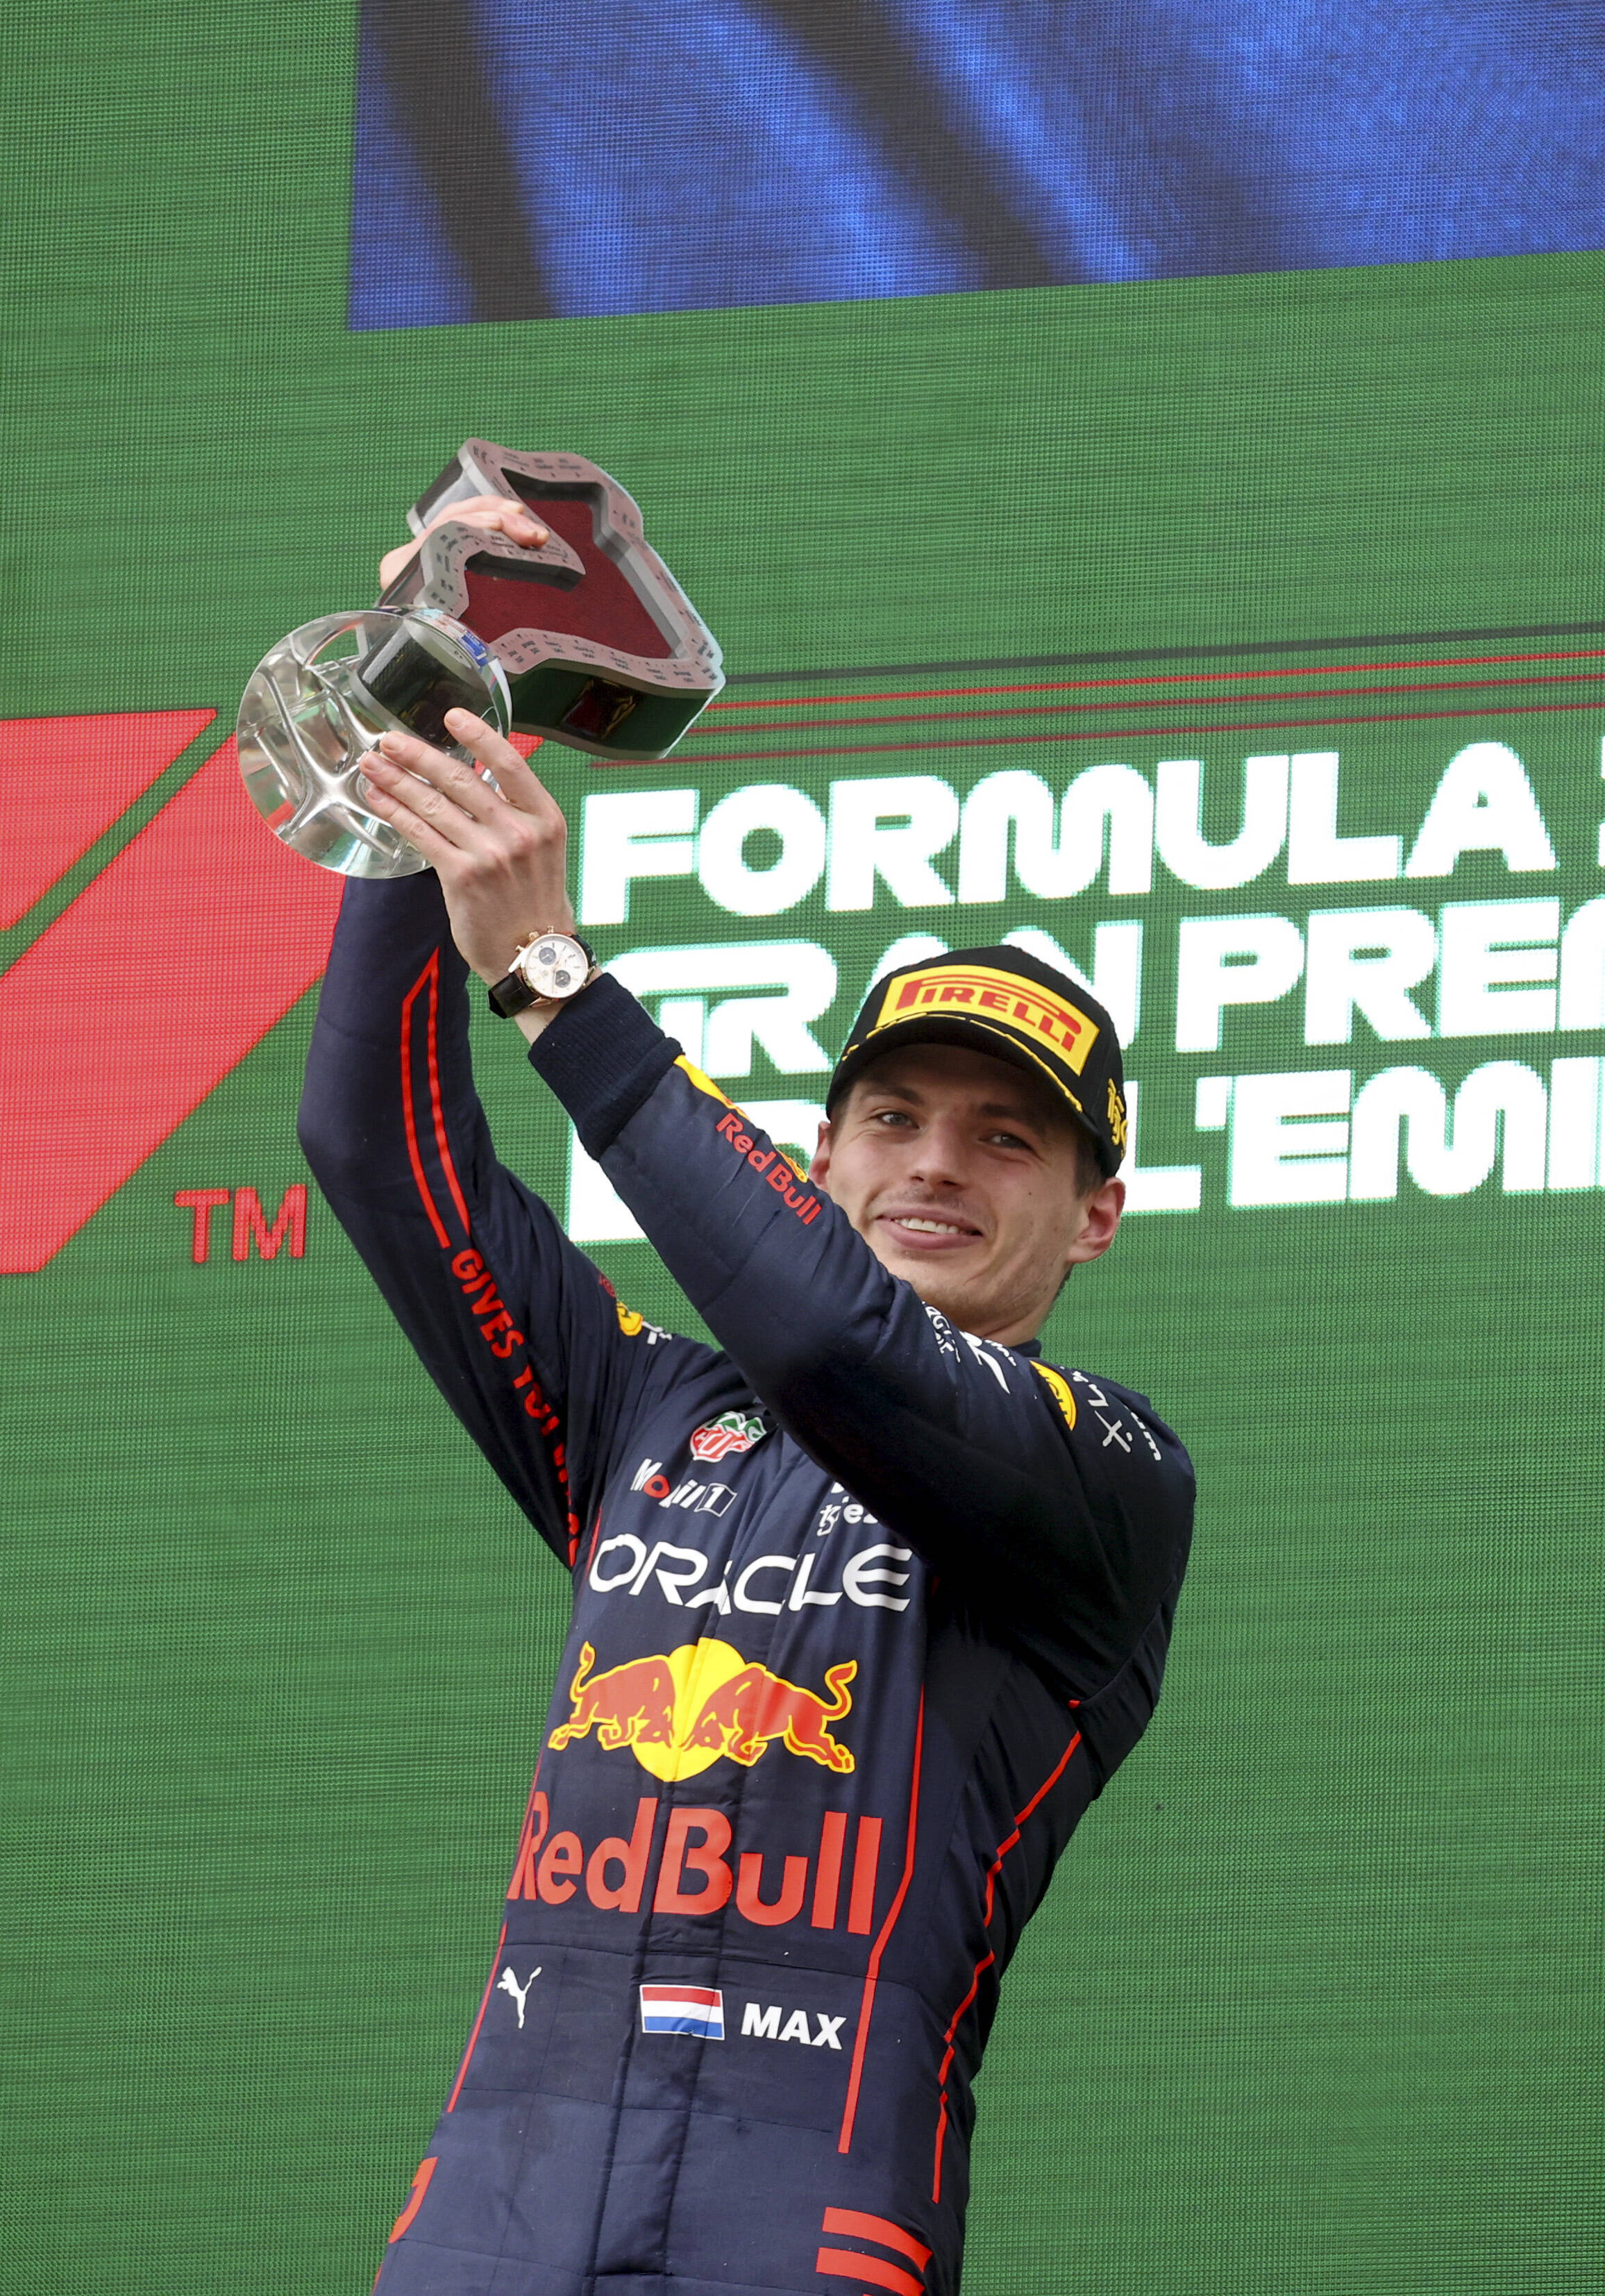 Max Verstappen dominates Italian Grand Prix as Charles Leclerc finishes in sixth